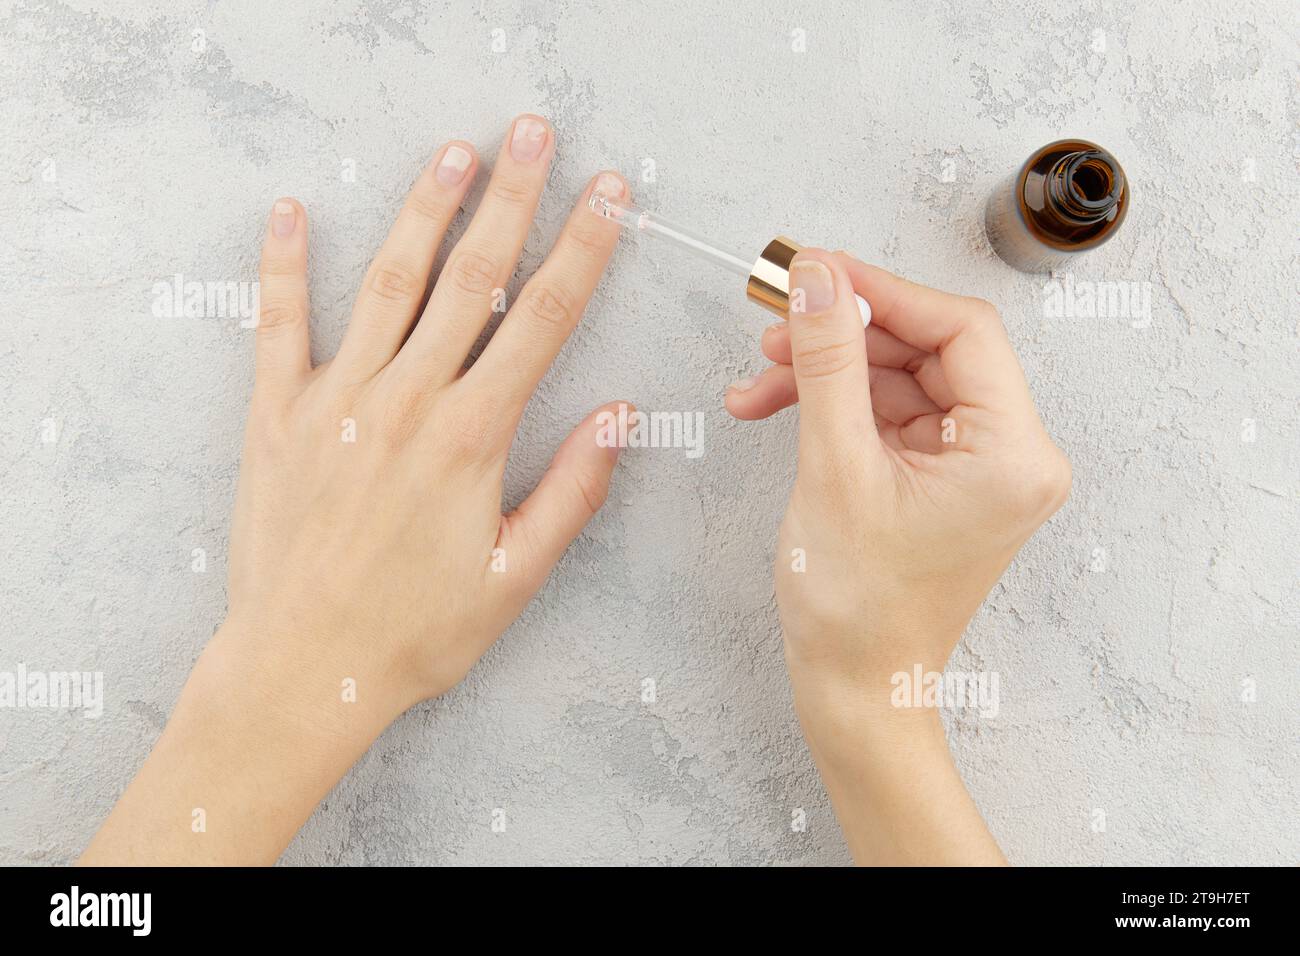 Woman applying medicine to damaged nails. Fingernails with onycholysis after removing gel polish Stock Photo